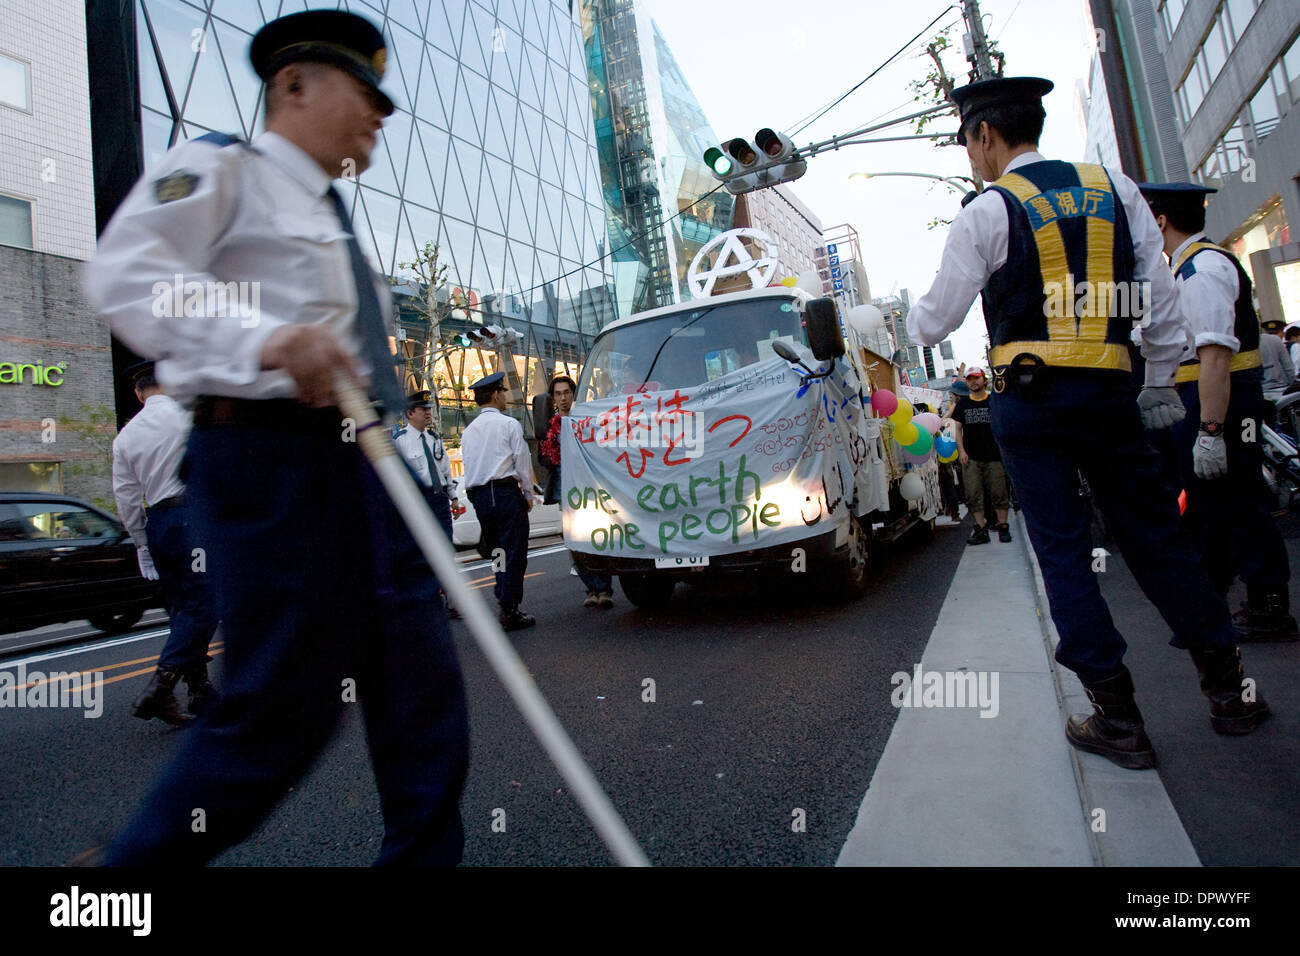 May 03, 2009 - Tokyo, Japan - Police officers direct traffic during a demonstration on the streets of Tokyo involving Japanese activists protesting about Japan's economic issues. (Credit Image: © Christopher Jue/ZUMA Press) Stock Photo